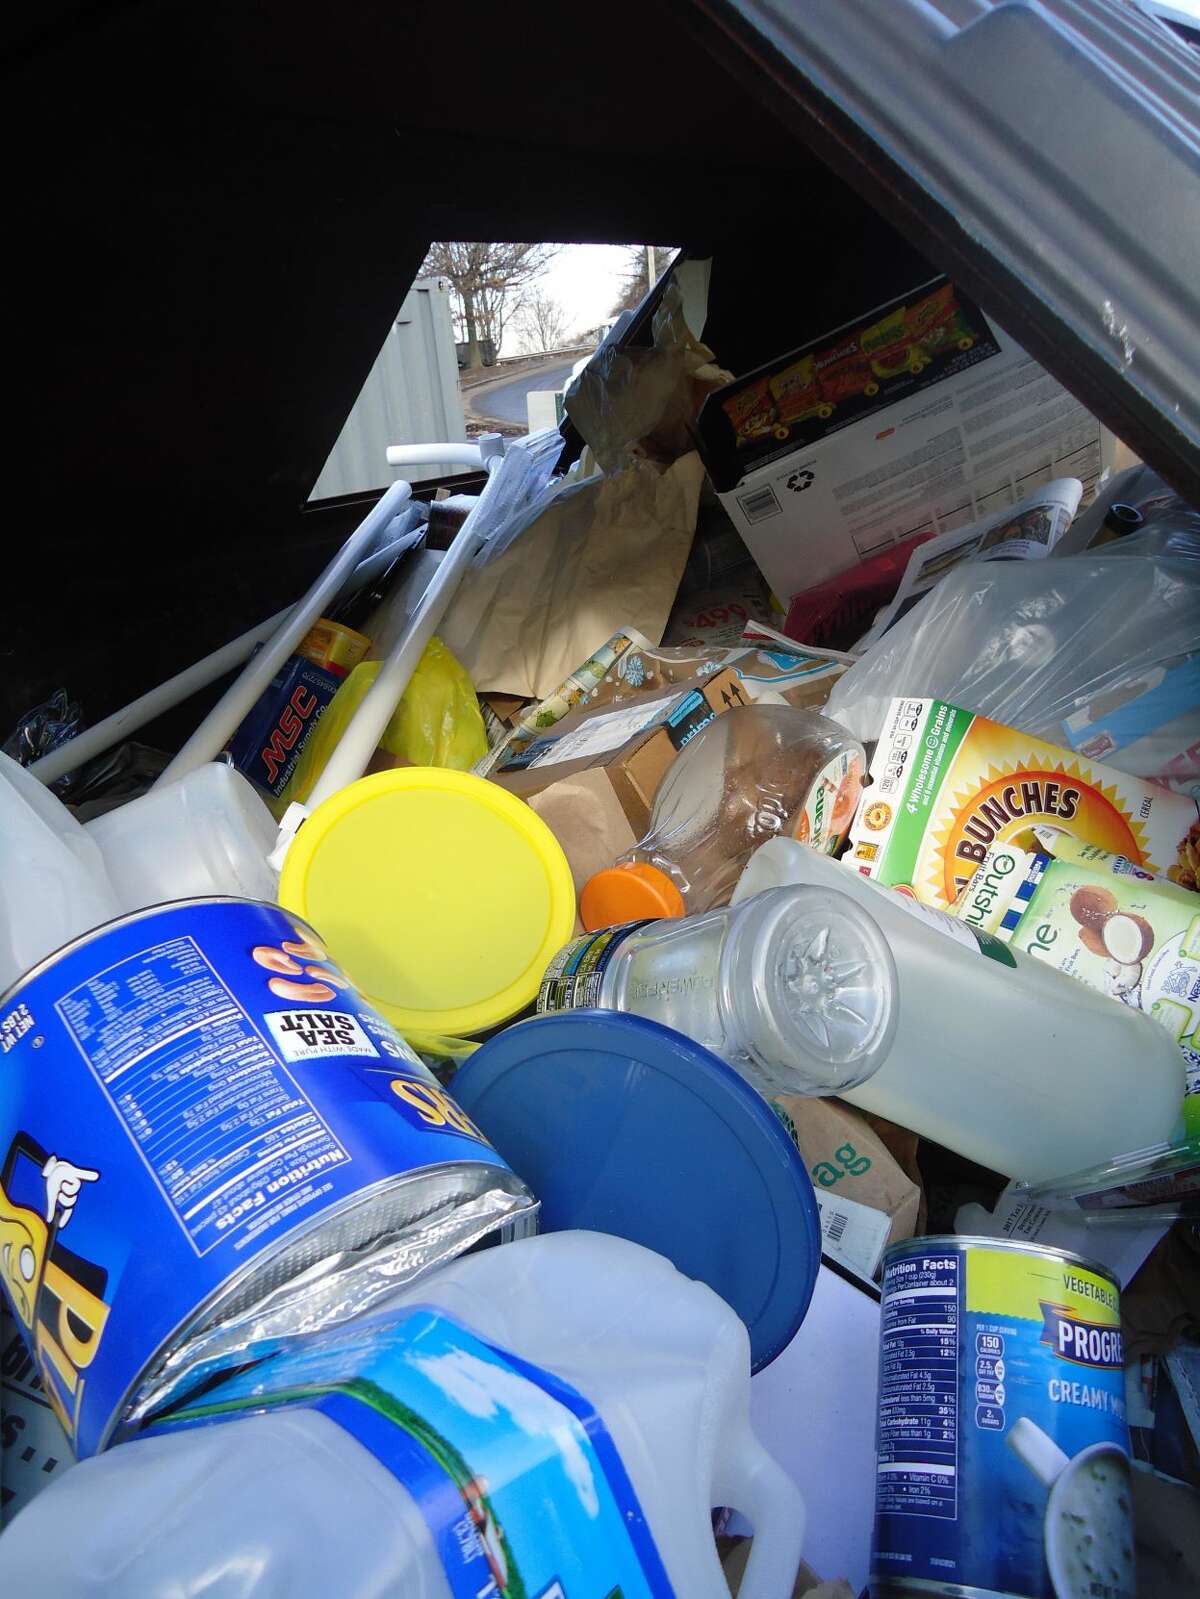 The recycling container in the Stratford Transfer Station on Watson Boulevard. Many of the items here can't be recycled, such as the plastic bags and the PVC pipe.